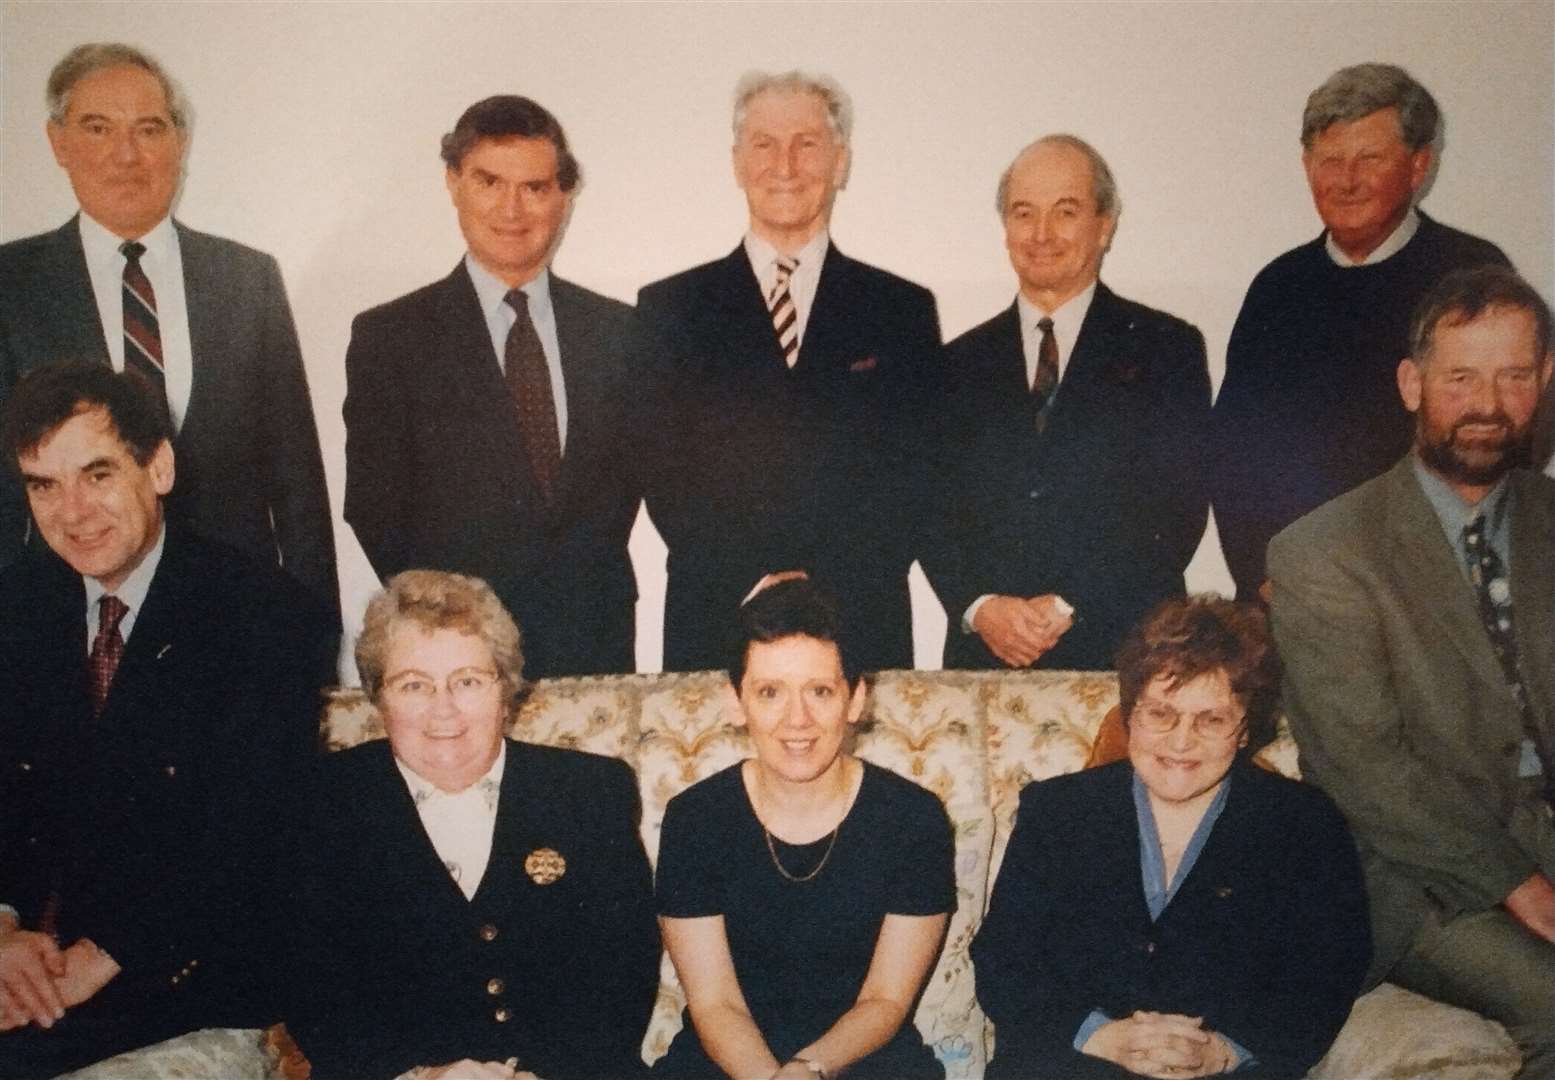 Major Graham Dunnett, the then Lord-Lieutenant, in 1999 with his Vice Lord-Lieutenant and deputies, including Captain Colin Farley-Sutton. Back row, from left: Dr Kenneth Swanson (Vice Lord-Lieutenant), Iain Gunn, Major Dunnett, Captain Farley-Sutton, Sir David Black. Front: Major Angus Mackay, Anne Dunnett, Dr Alison Brooks, Irene Mackay and Alistair Swanson. Missing from the photo was Councillor Deirdre Steven, Picture: Mario Luciani